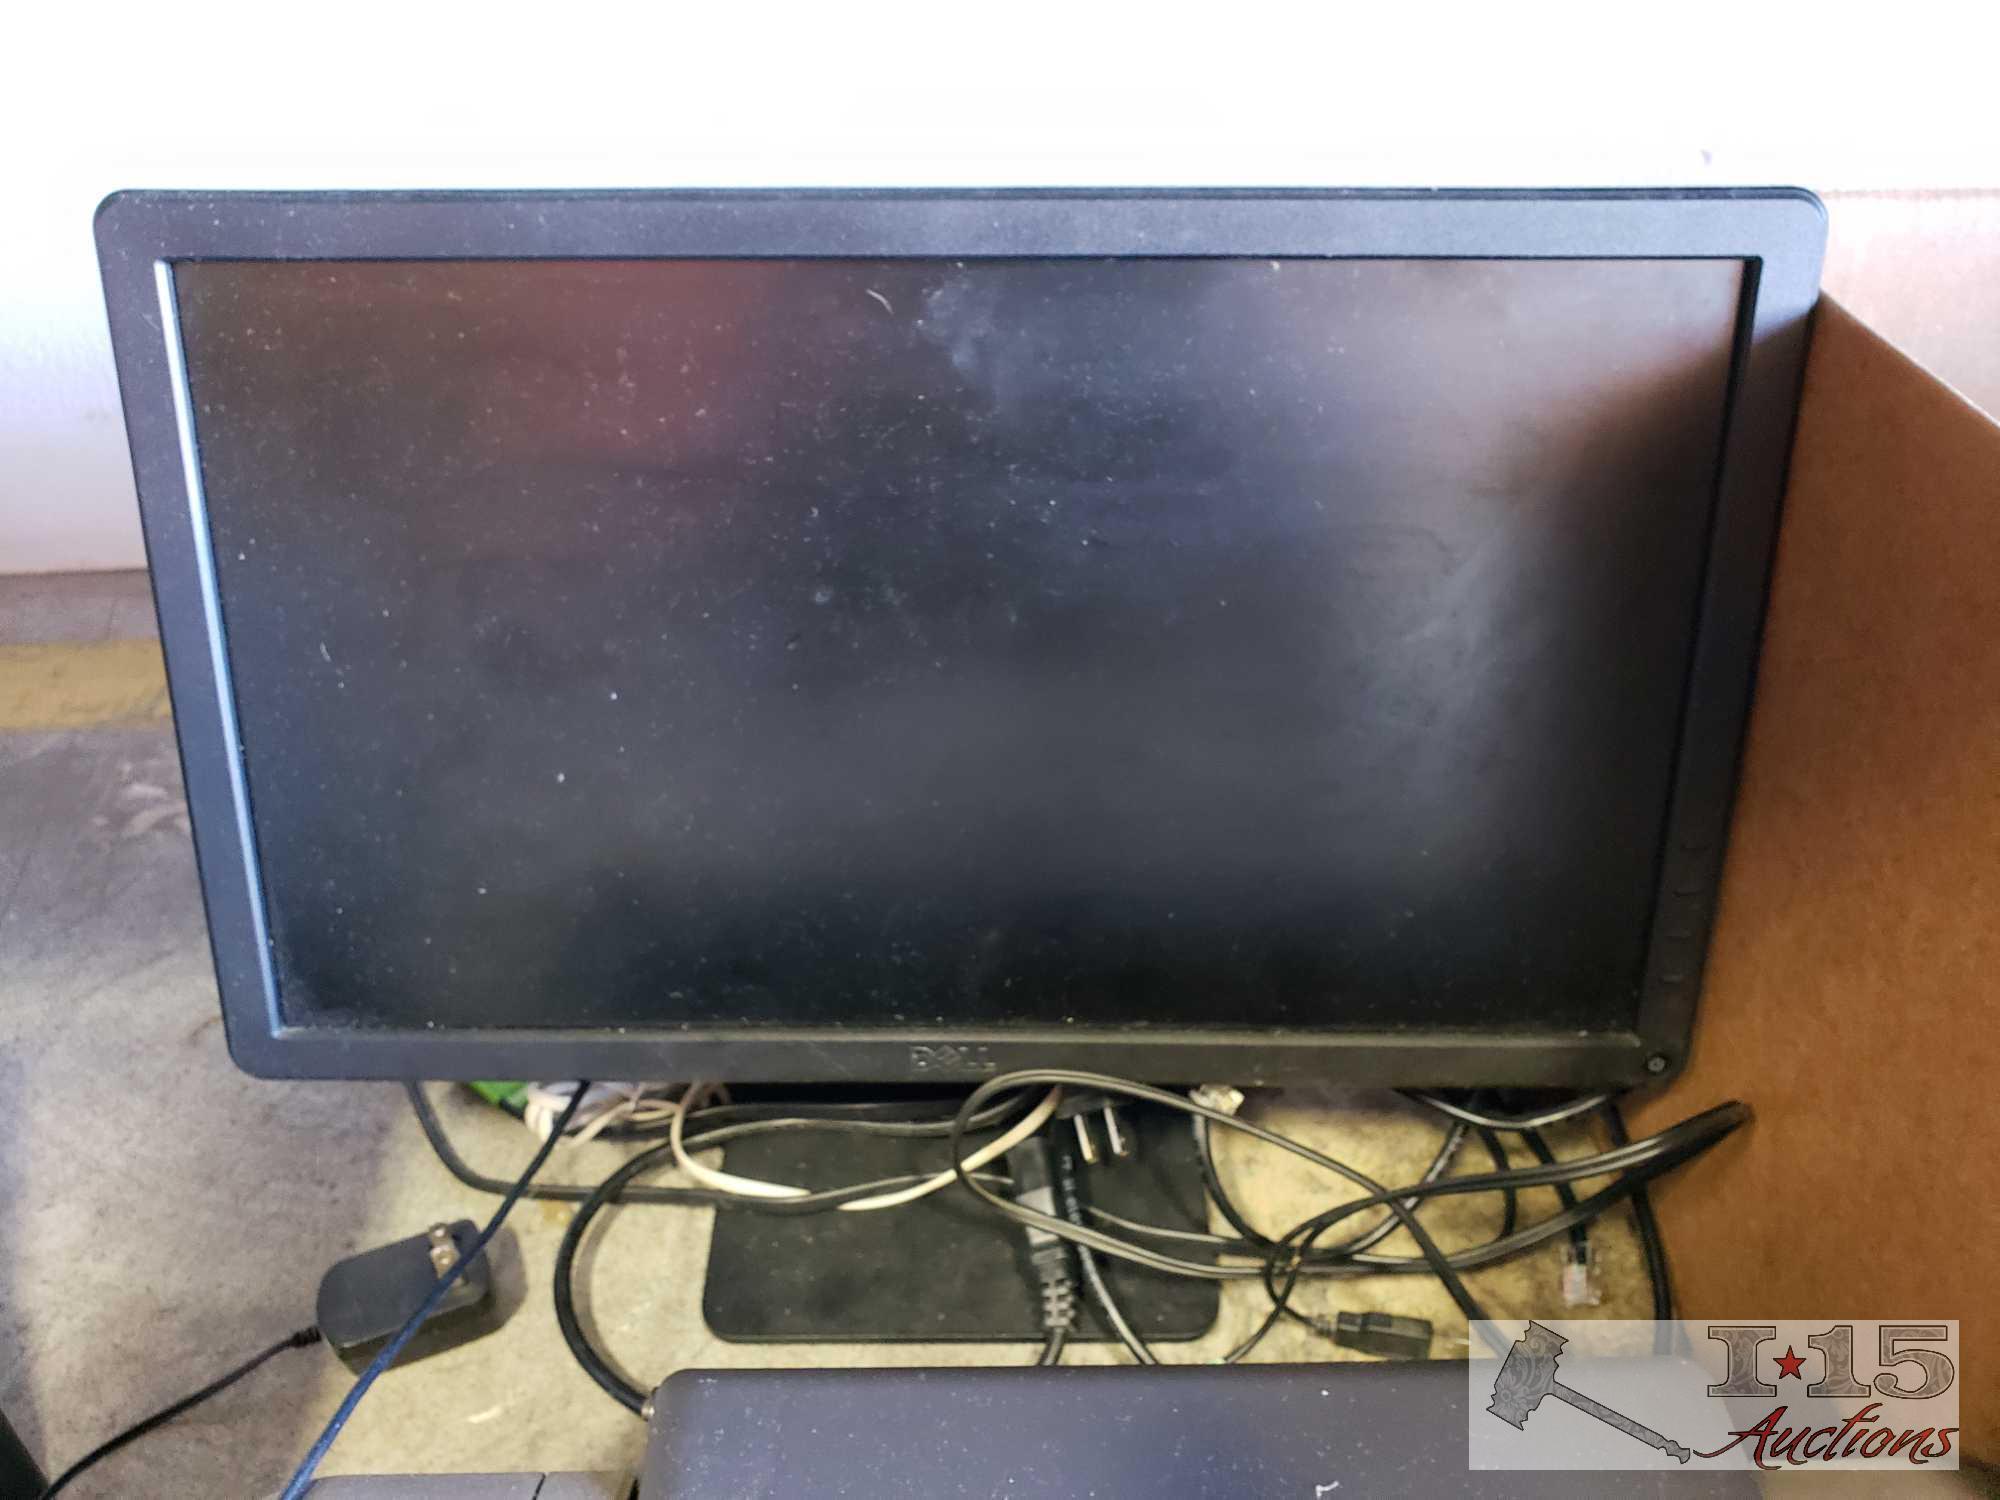 2 Dell Keyboards, HP Printer, Dell Monitor, Altec Speakers and More